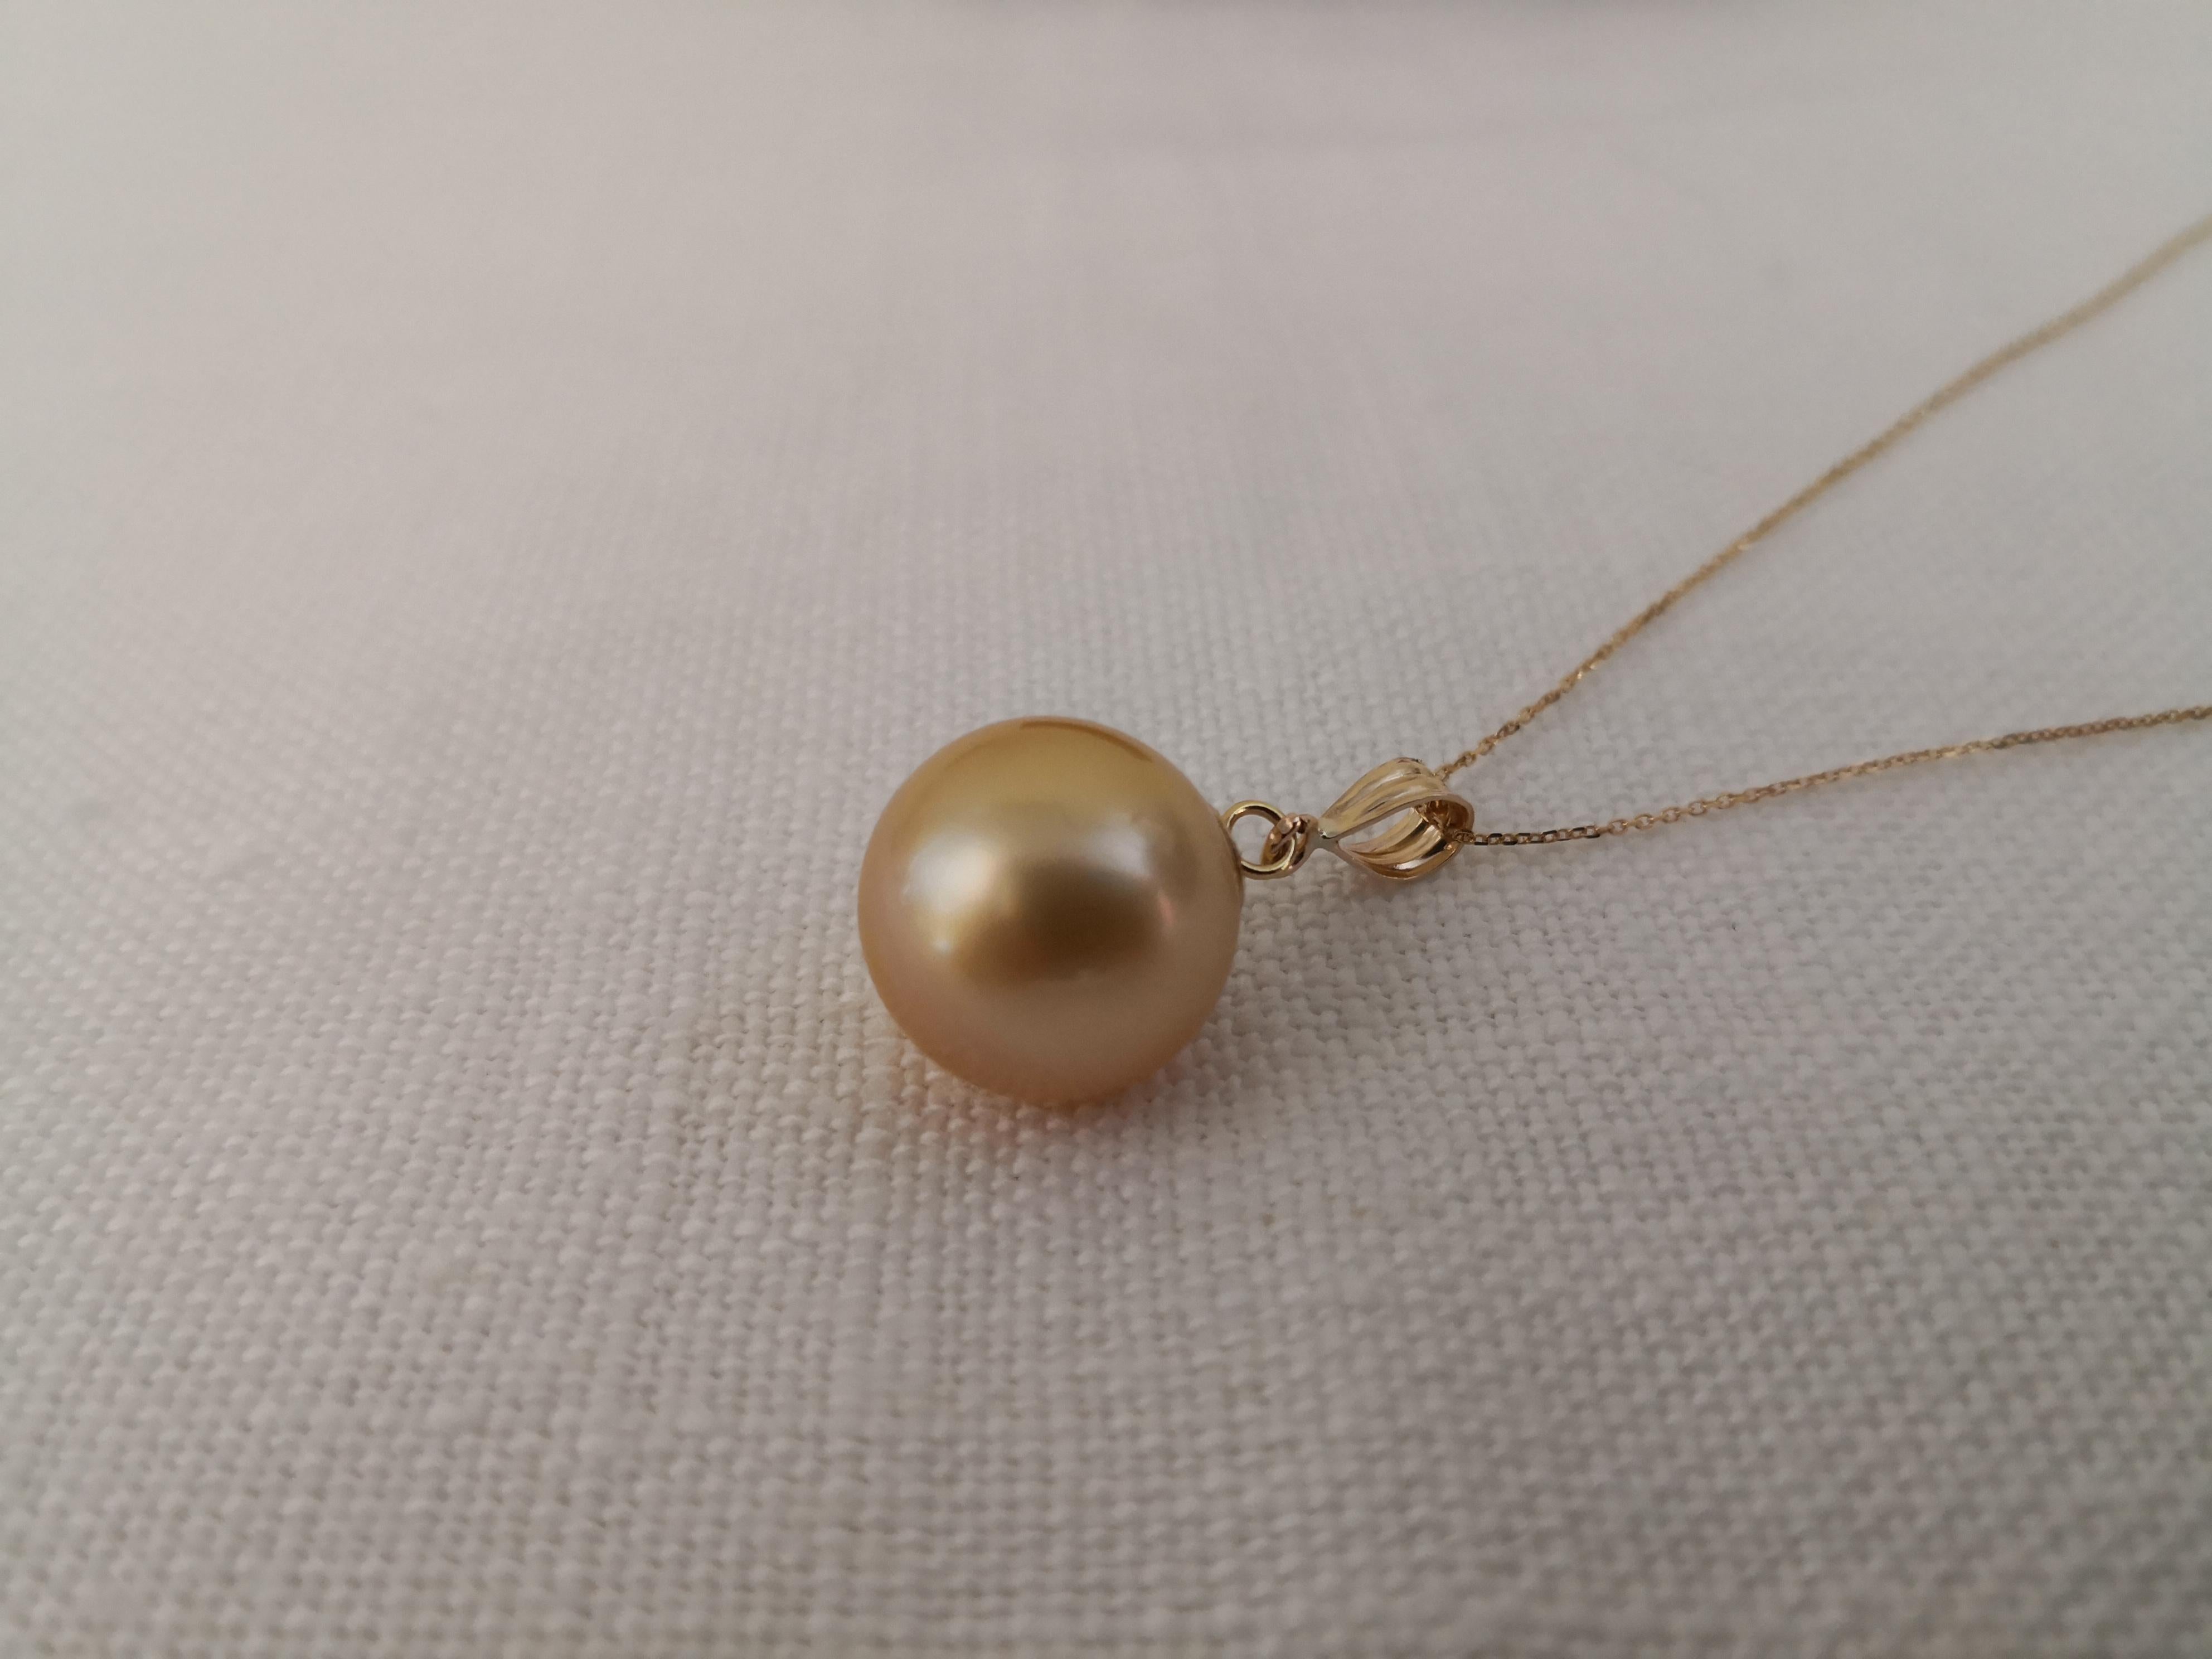 Natural Color South Sea Pearl Pendant

- Origin:  Indonesia ocean waters

- Produced by Pinctada Maxima Oyster

- 14  karats Yellow Gold mounting 

- 45 cm long chain manufactured in 14 karats Yellow gold

- Total weight of 6.90  grams

- Size of